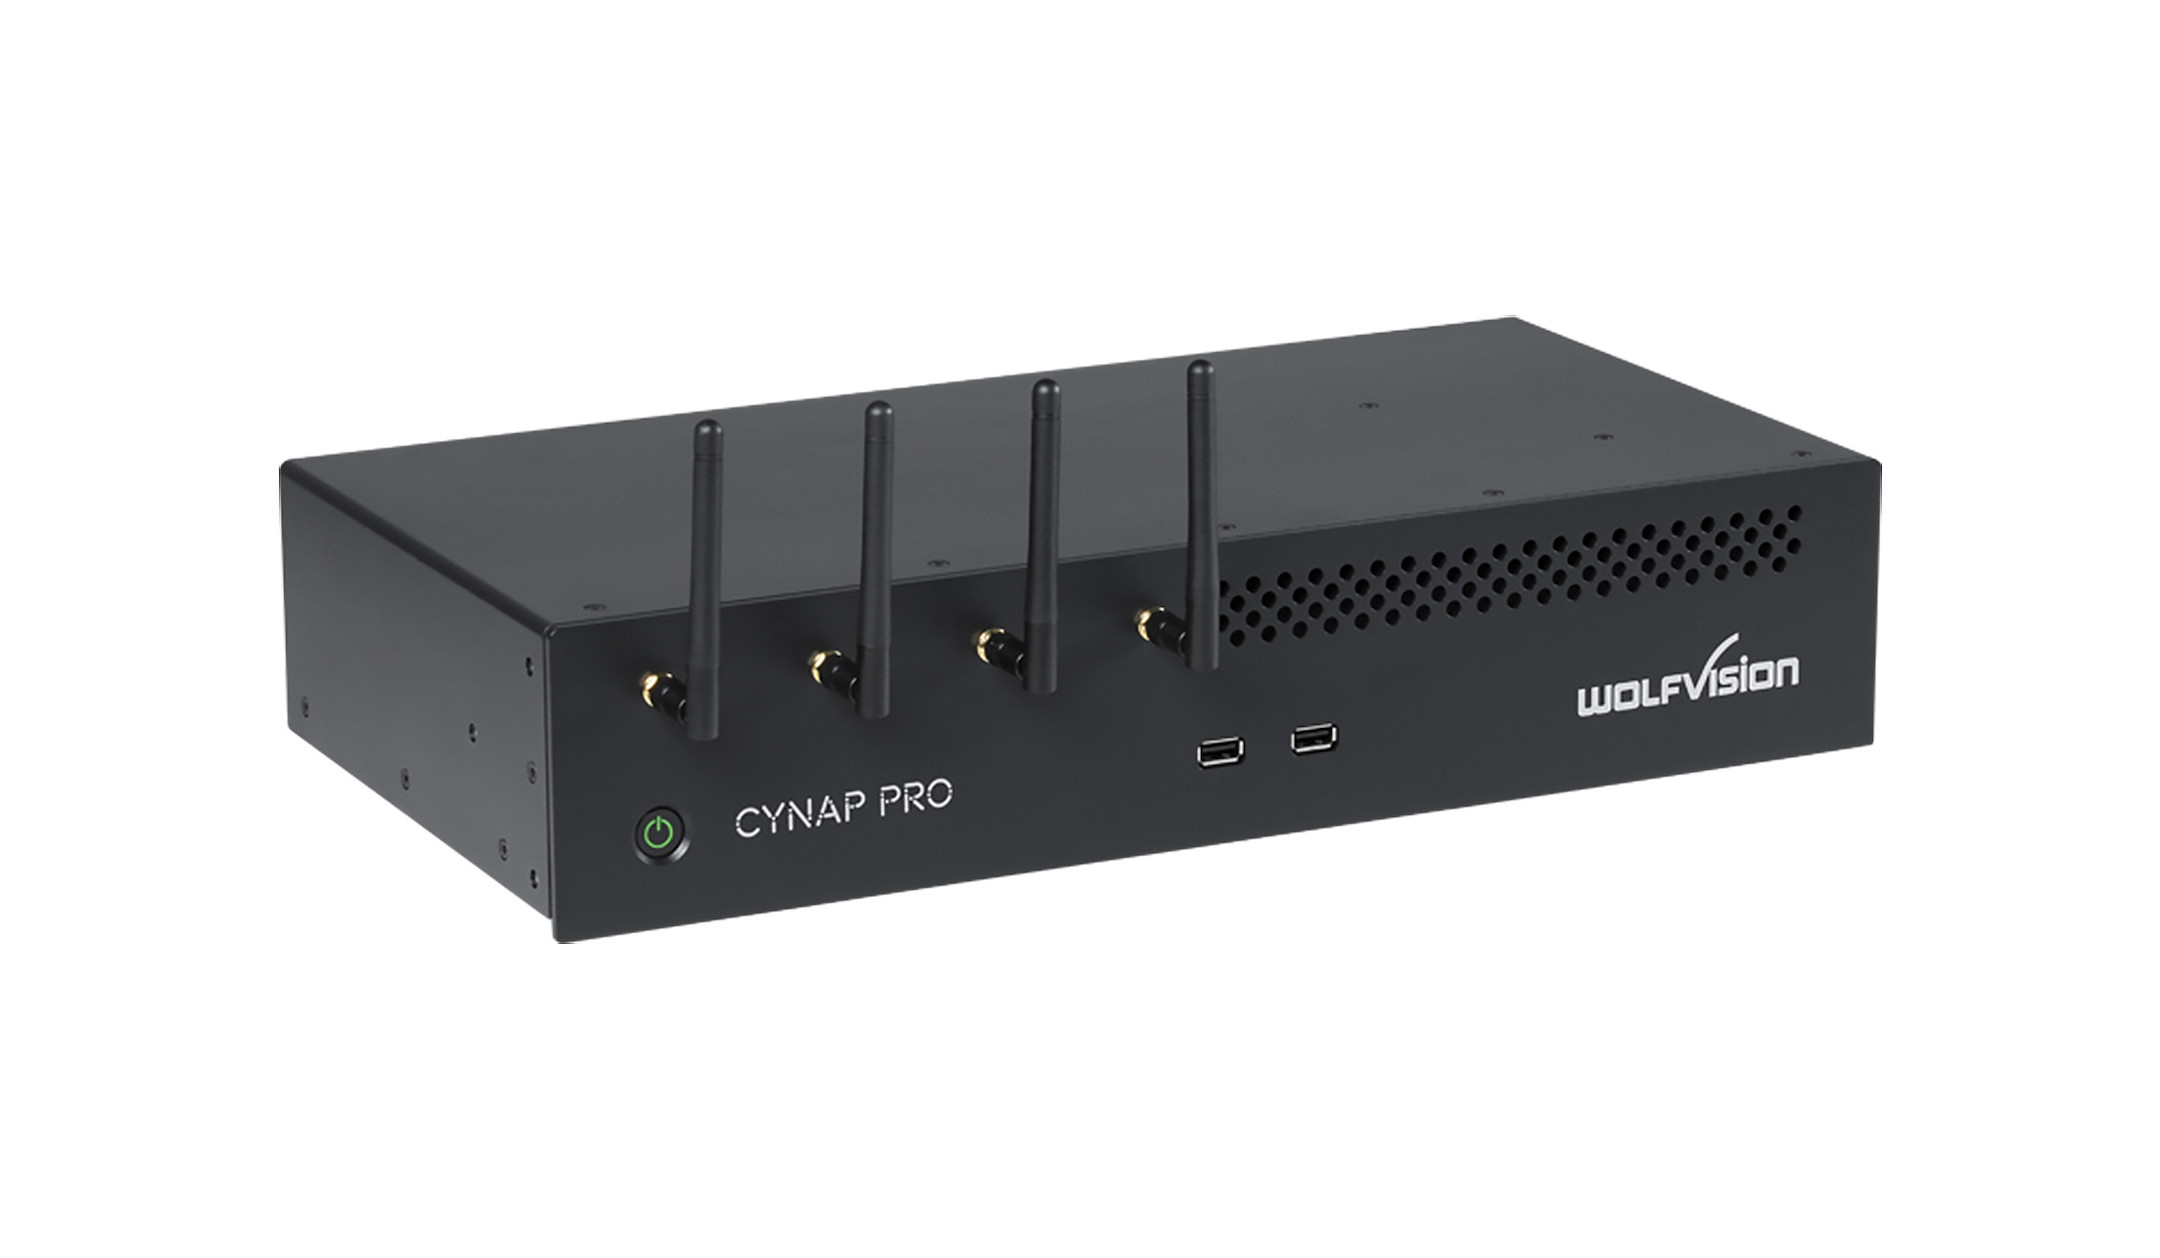 Wolfvision-Cynap-Pro-HDMI-HDBaseT-IN-Version-B-drahtloses-All-in-One-Prasentationssystem